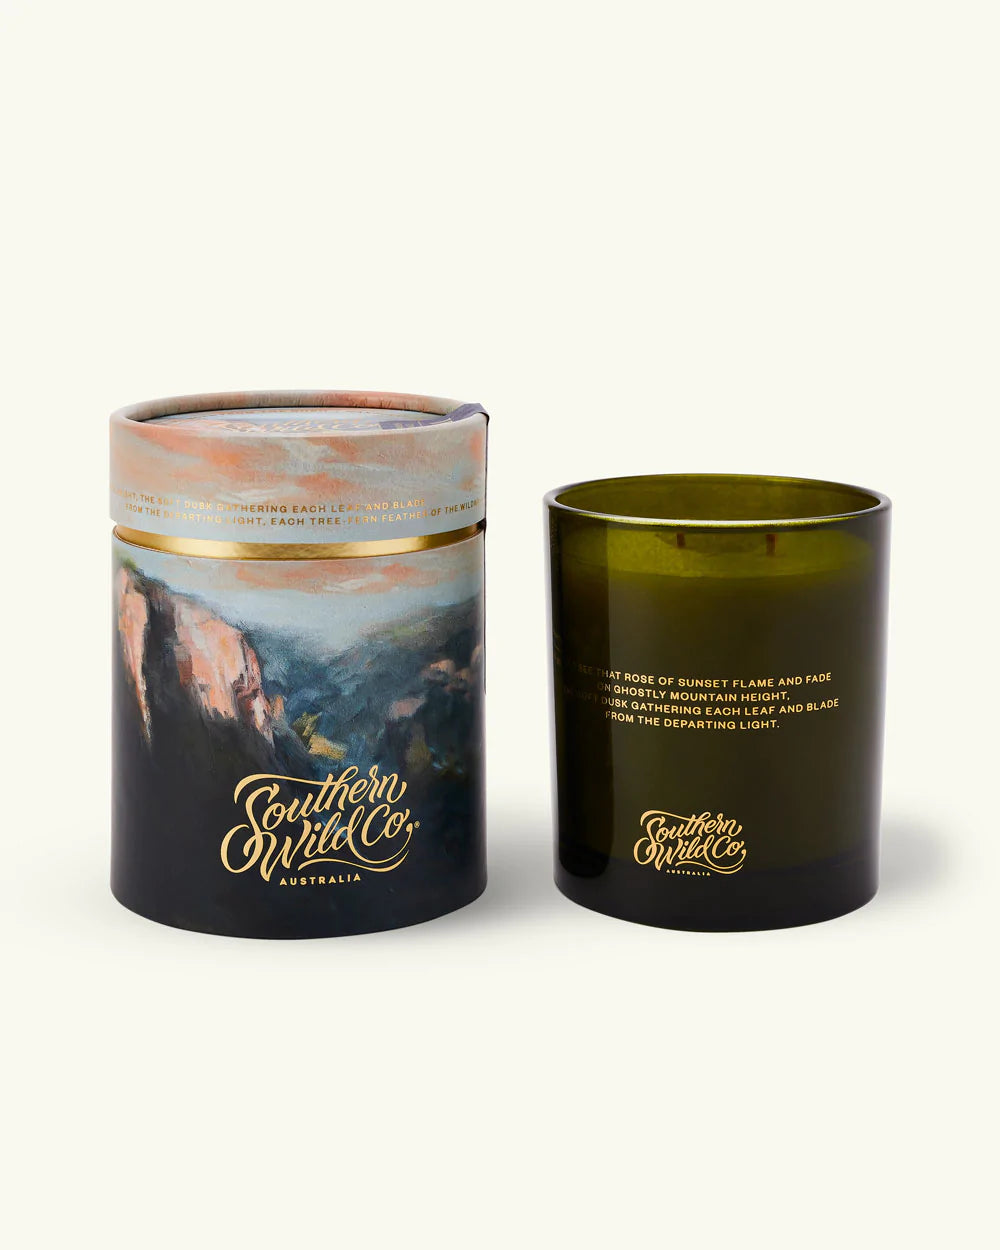 SWC - Hidden Vale Candle